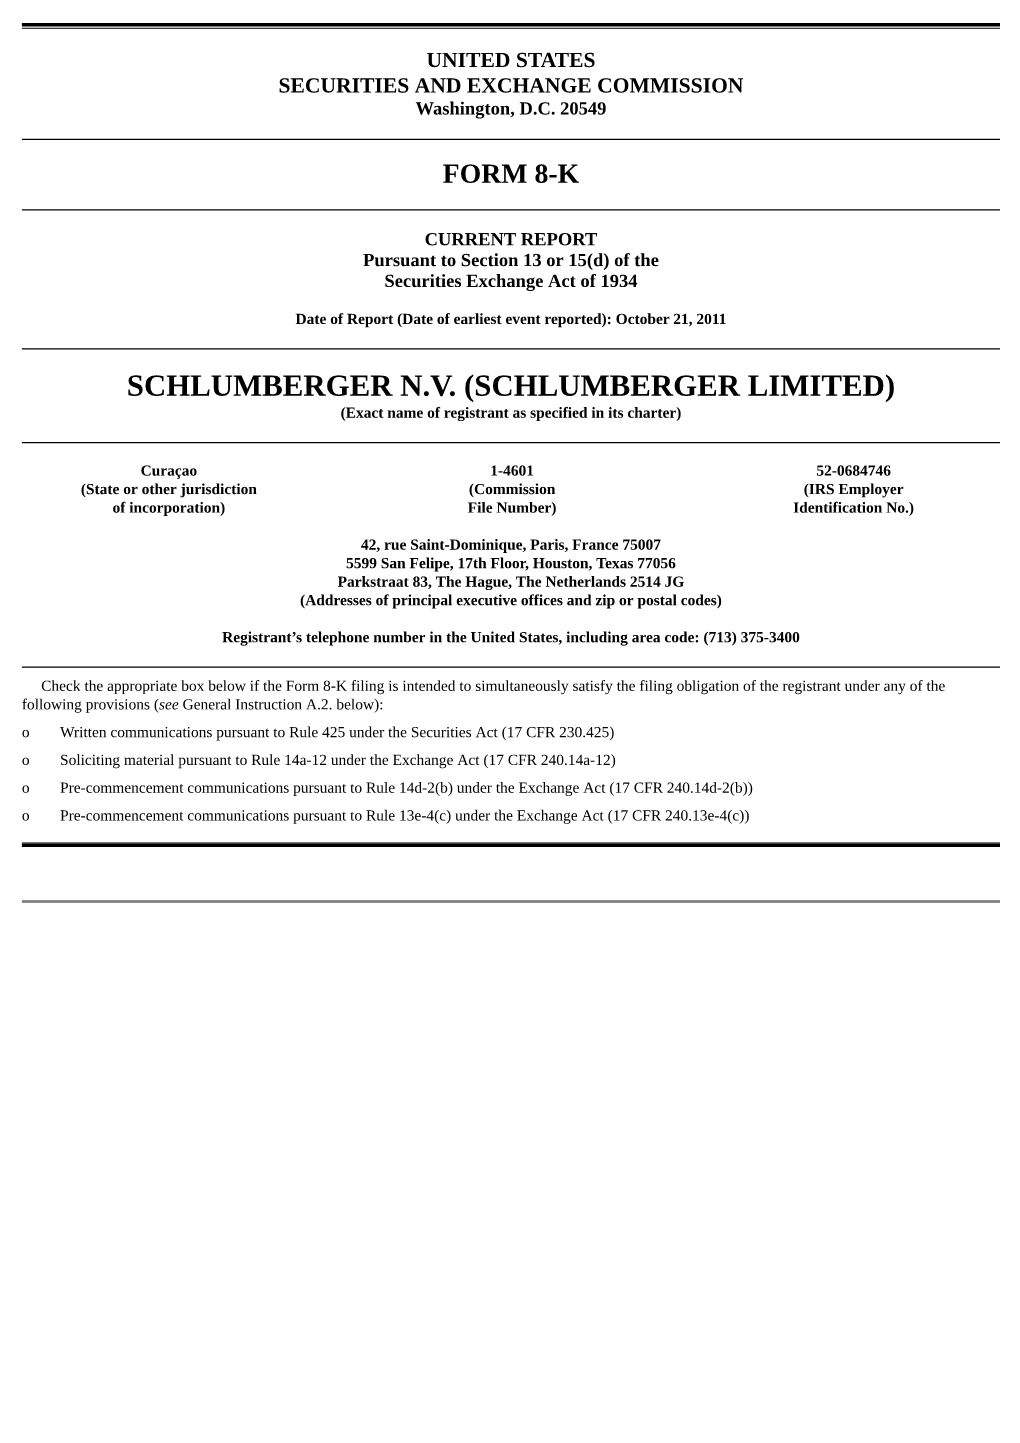 SCHLUMBERGER N.V. (SCHLUMBERGER LIMITED) (Exact Name of Registrant As Specified in Its Charter)